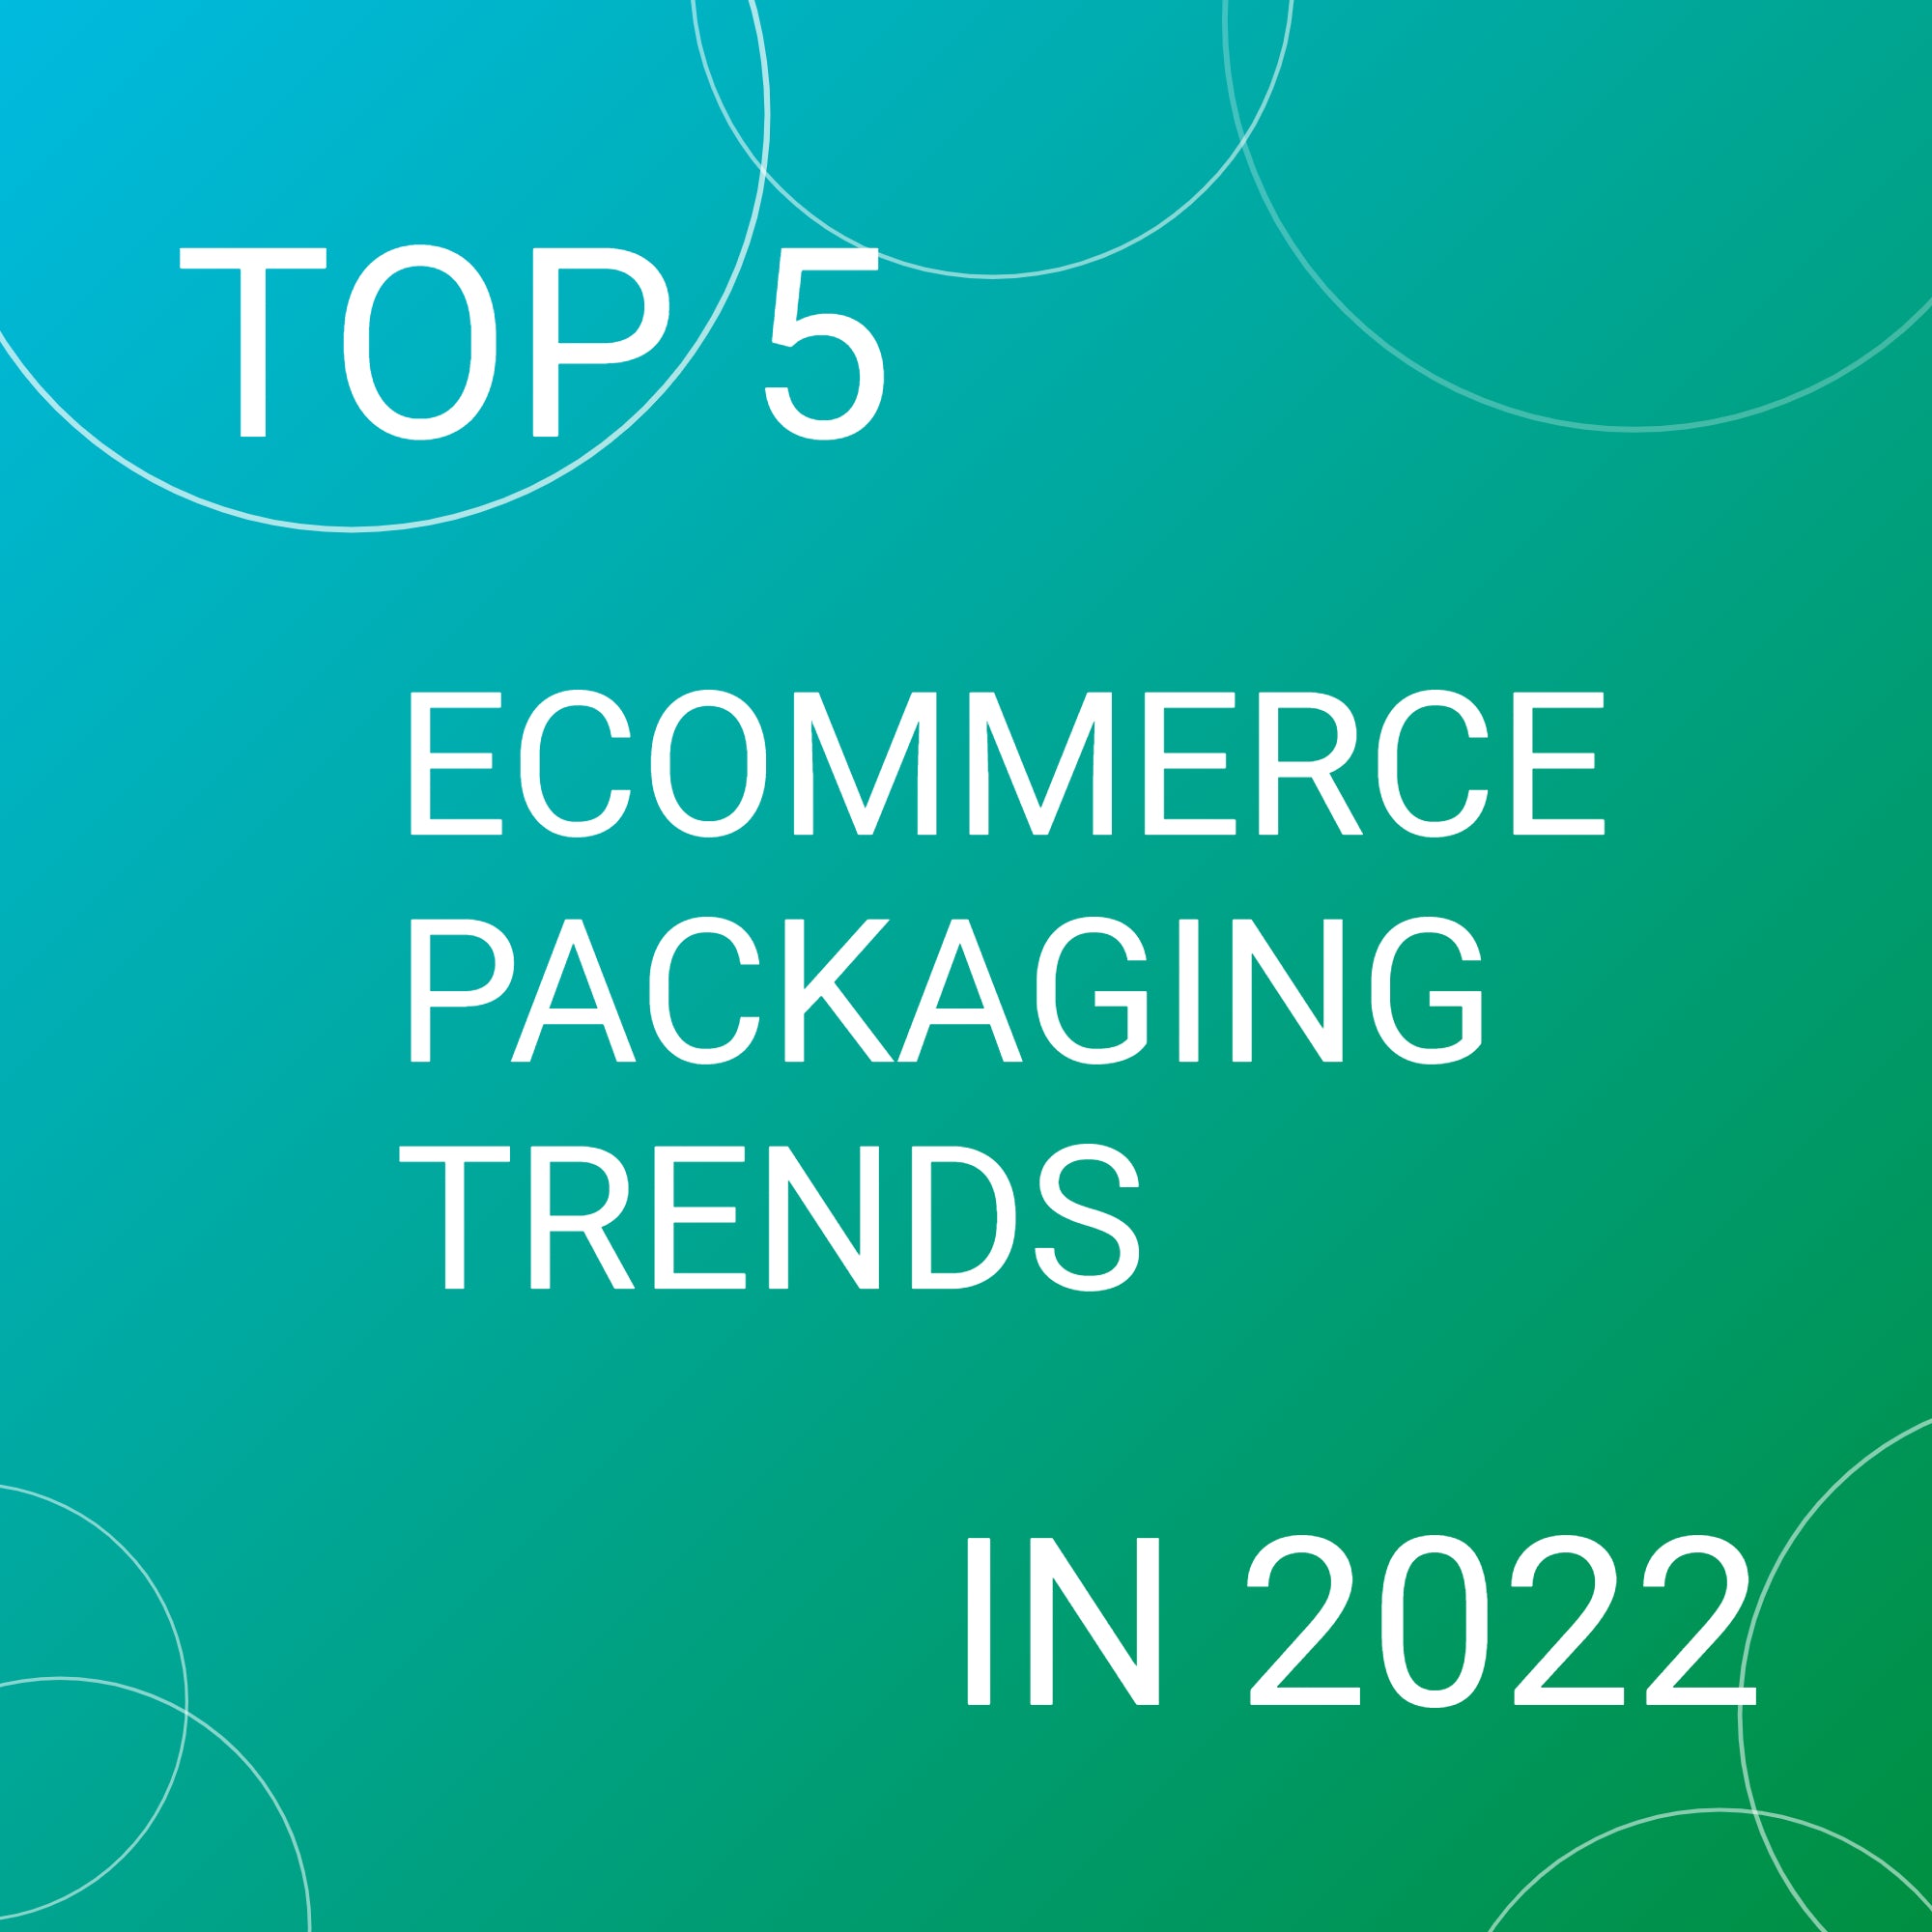 Top 5 Ecommerce Packaging Trends in 2022